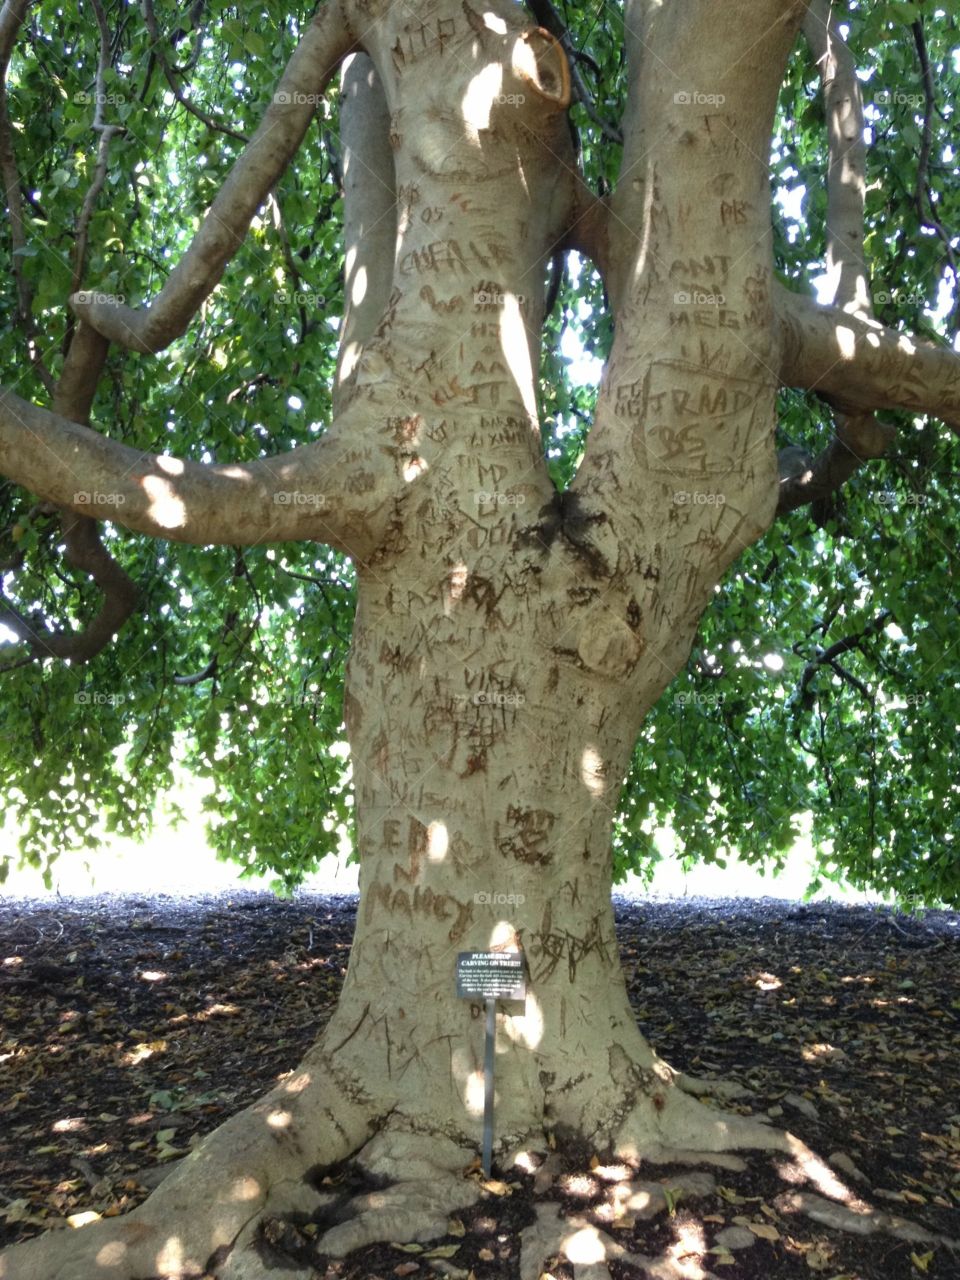 Tree with carvings